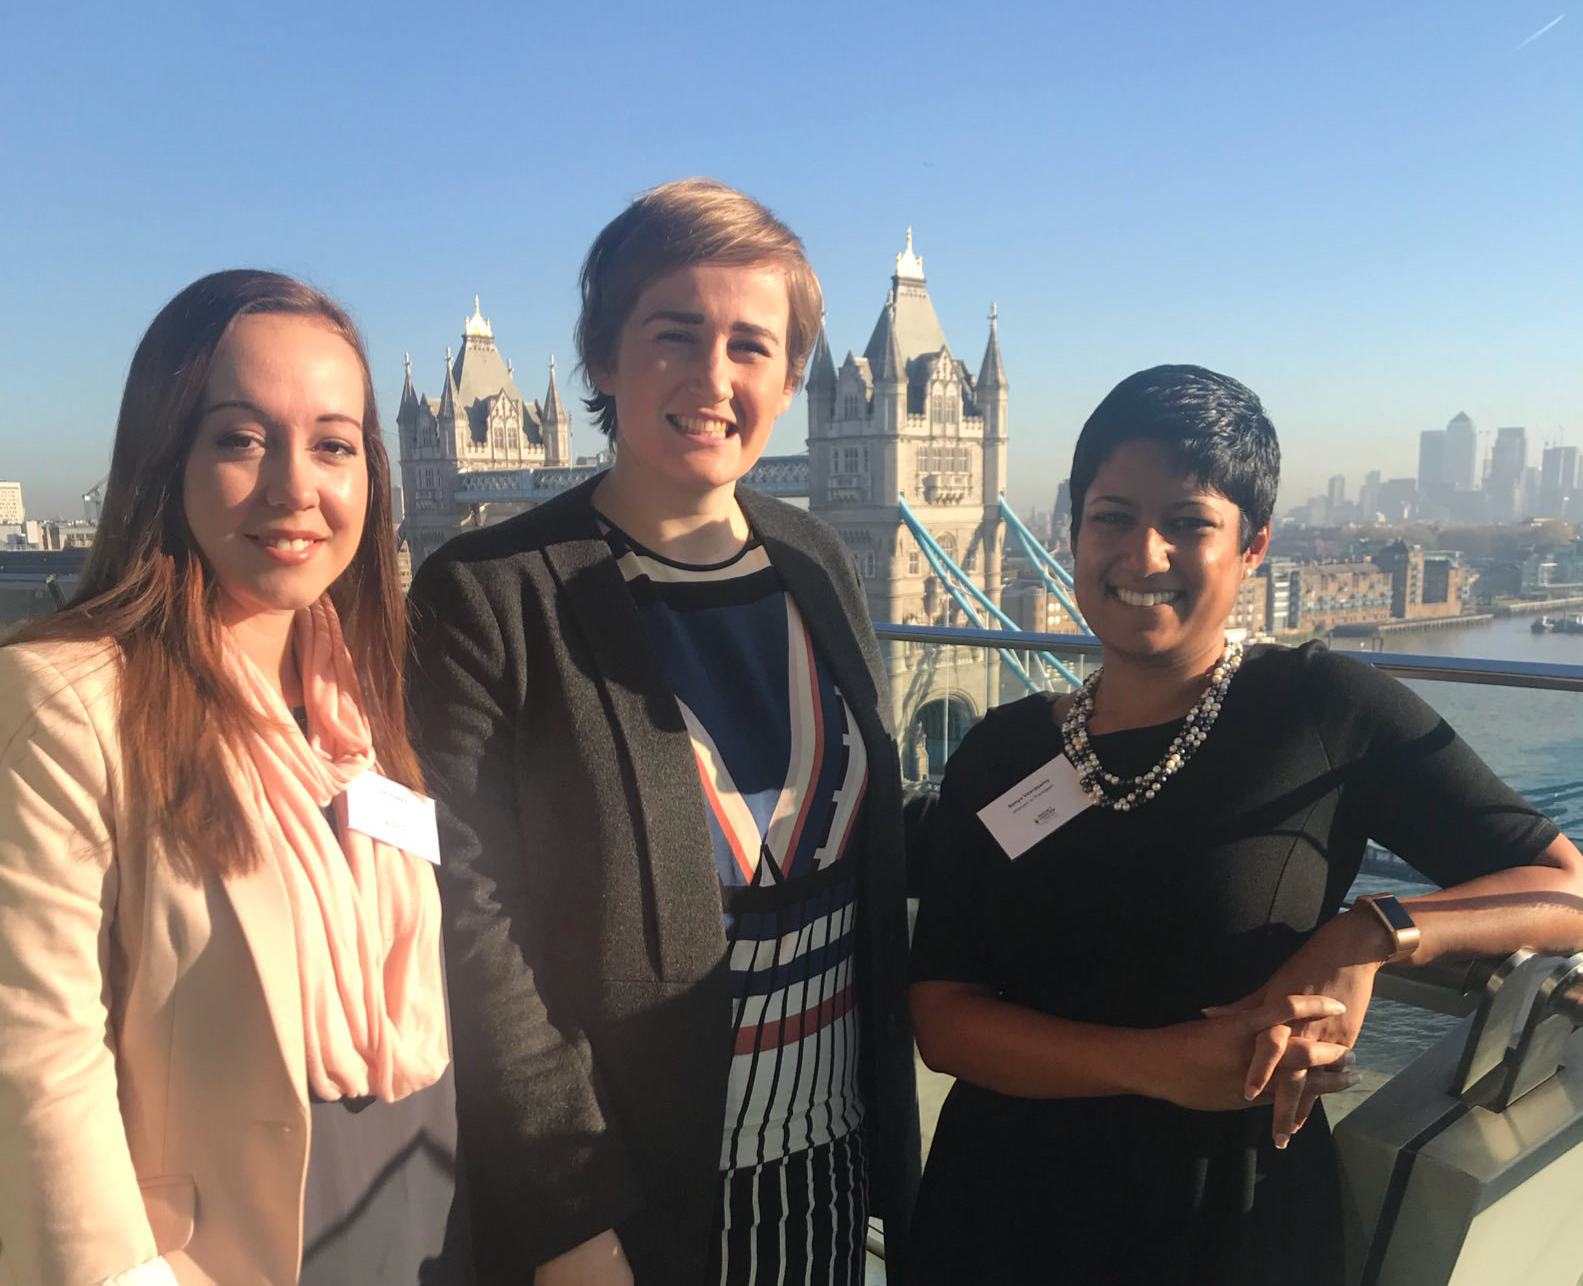 TXM Recruit preparing for a busy 2018 with BAME and Women in Transport